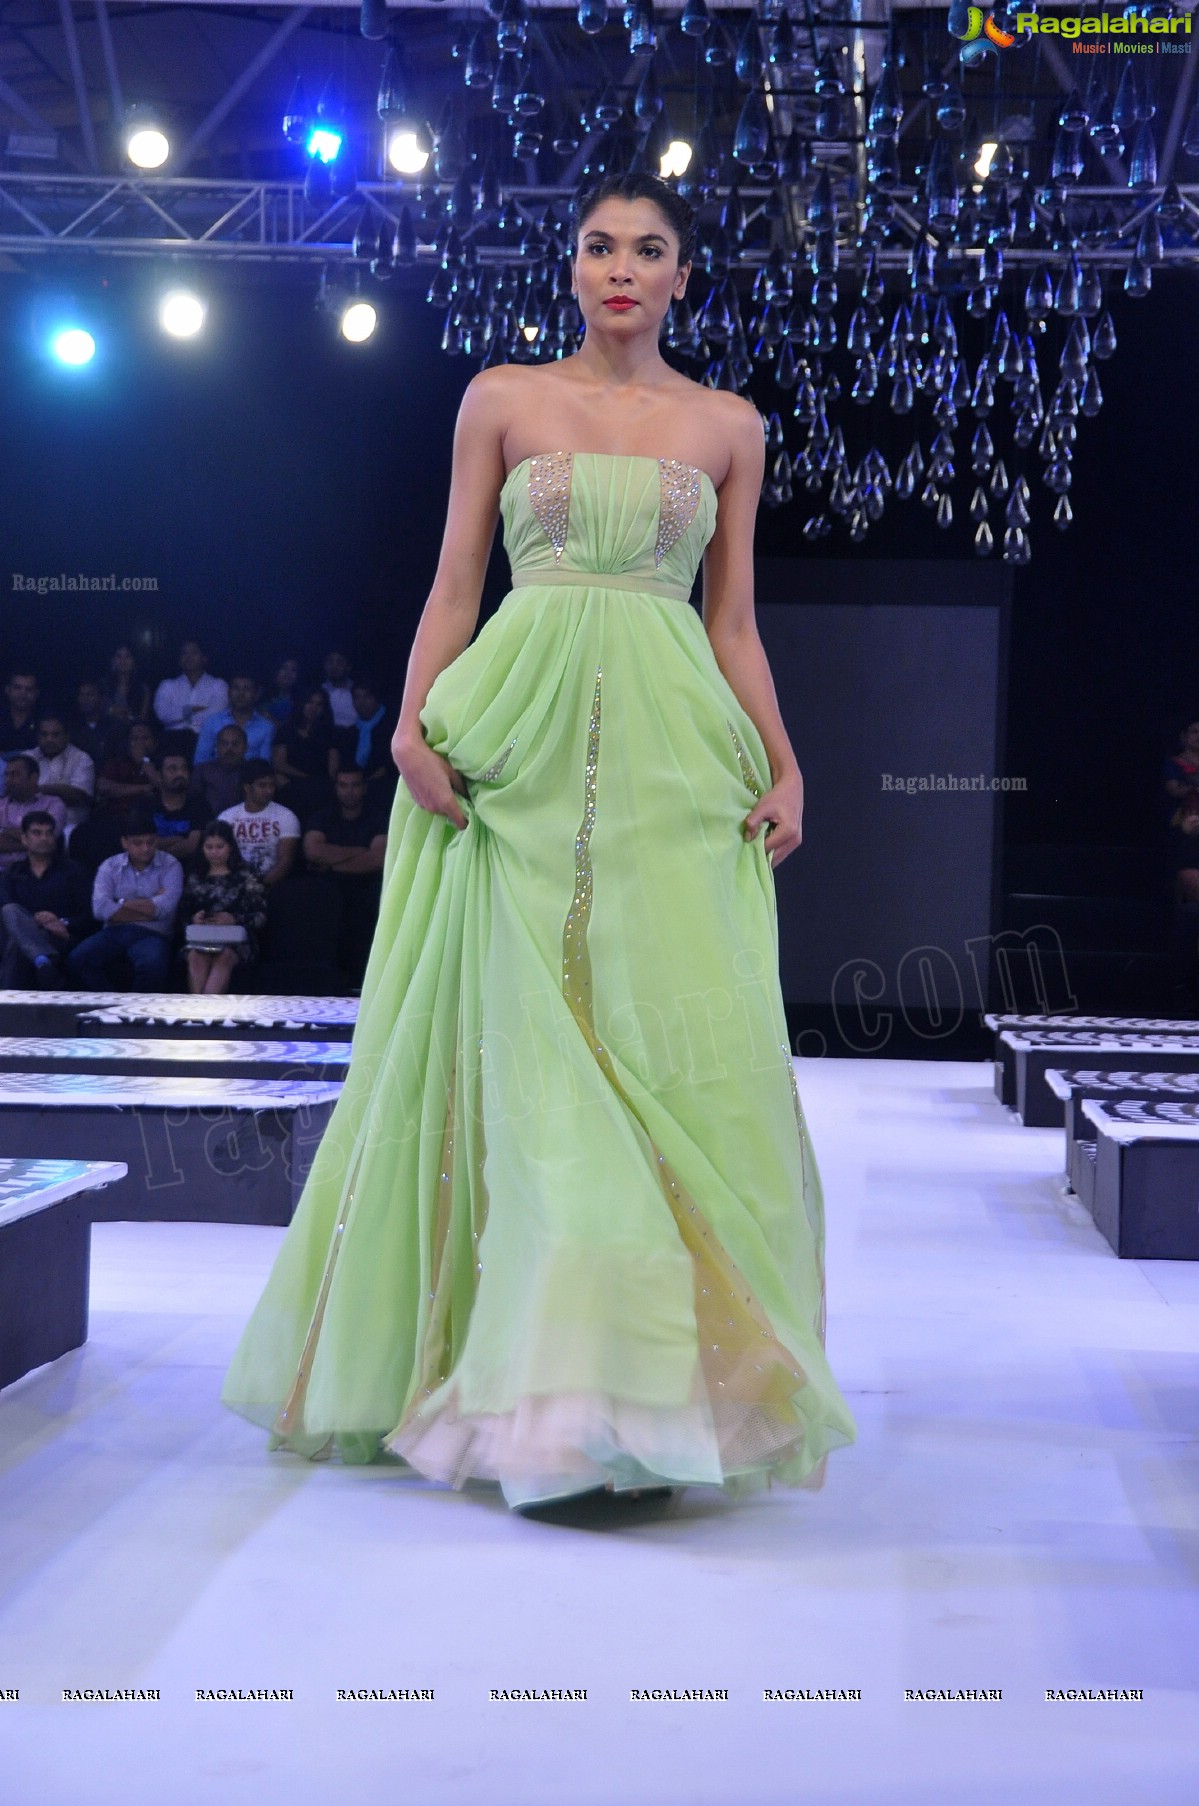 Blenders Pride Fashion Tour 2012, Hyderabad (Day 1)